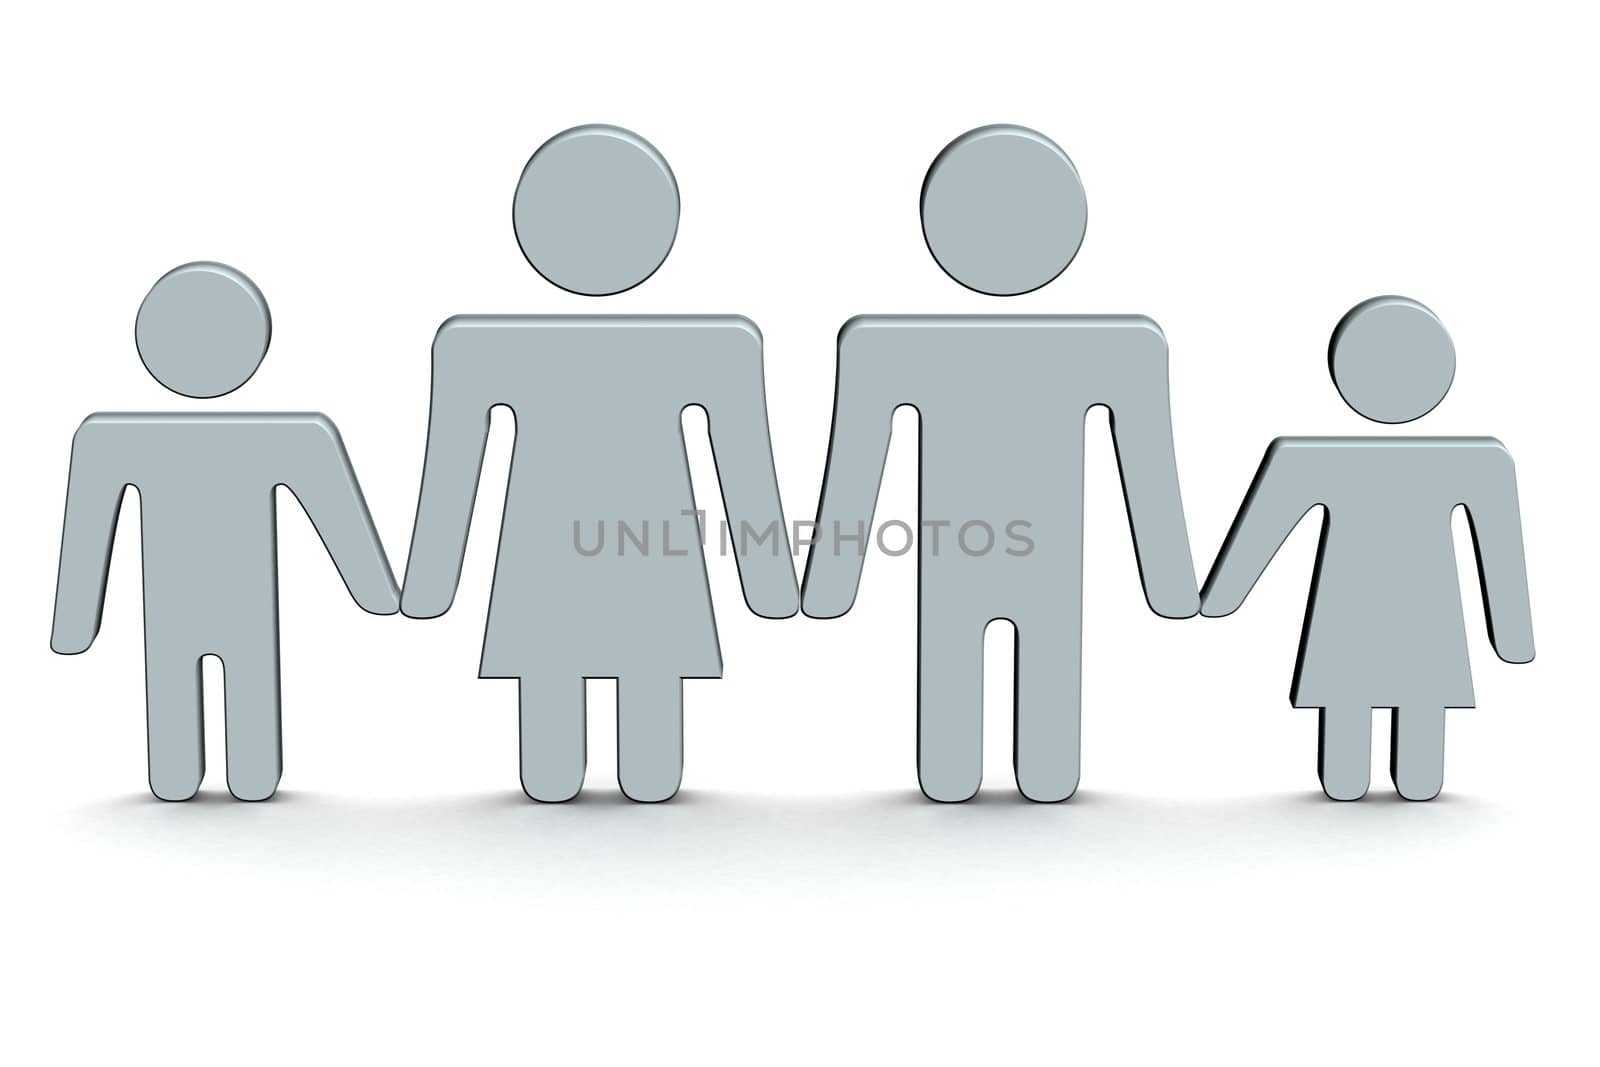 The image of family. 3D illustrations.